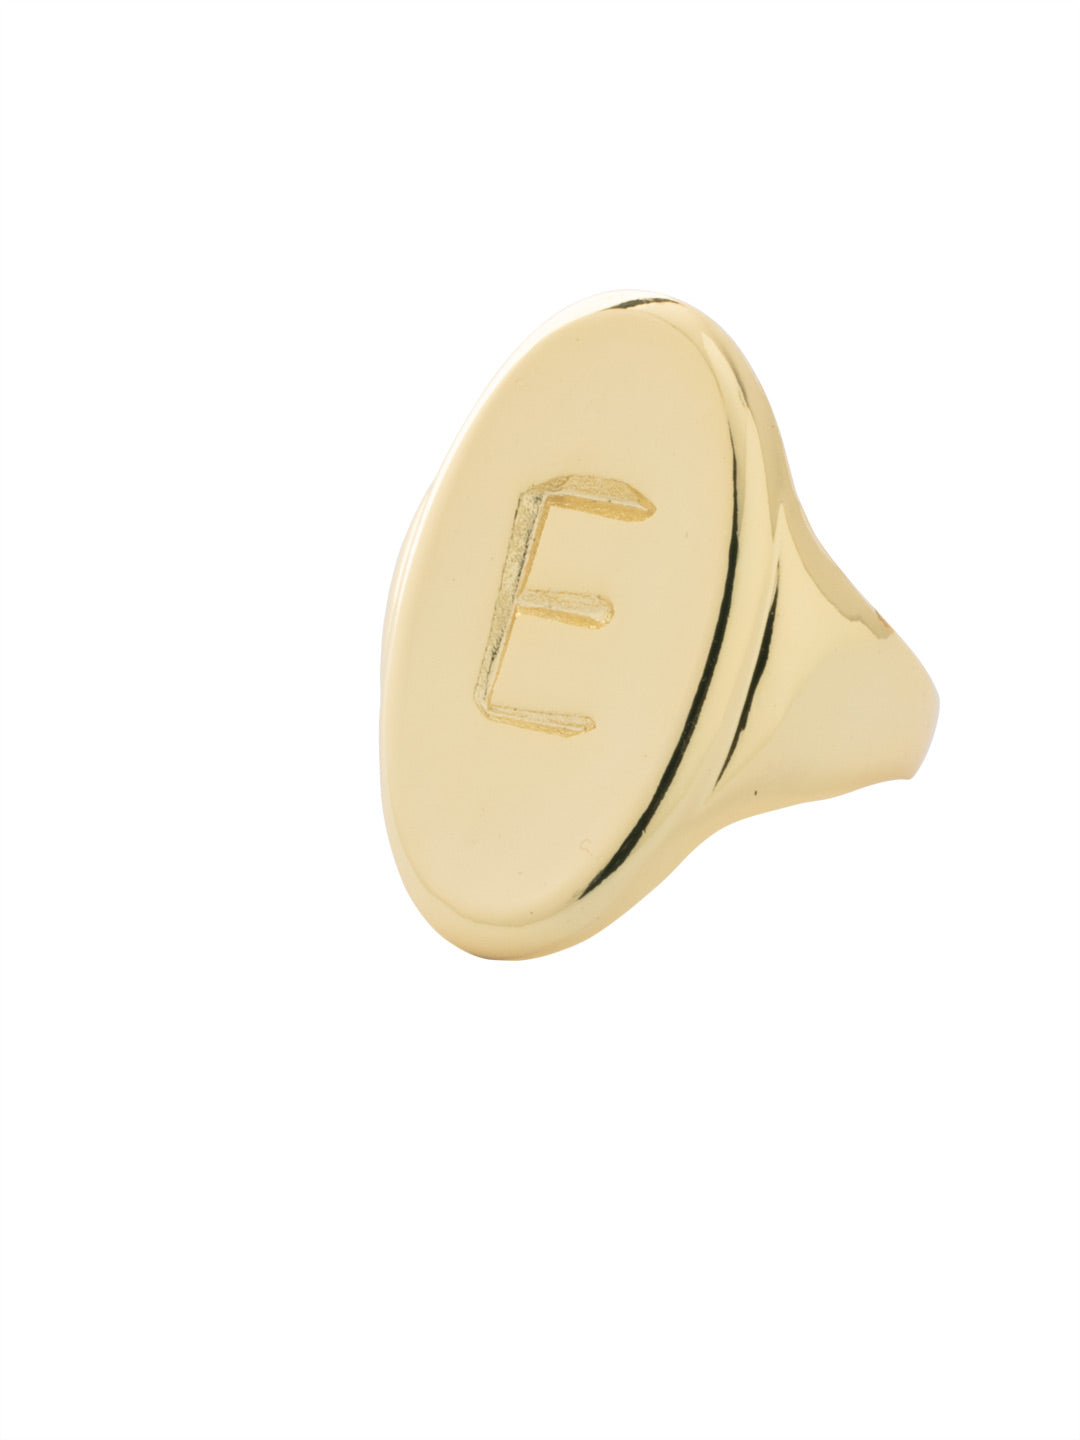 "E" Signet Statement Ring - RFK34BGMTL - <p>The Signet Statement Ring features a capital letter stamped into an oblong metal disk on an adjustable ring band. From Sorrelli's Bare Metallic collection in our Bright Gold-tone finish.</p>